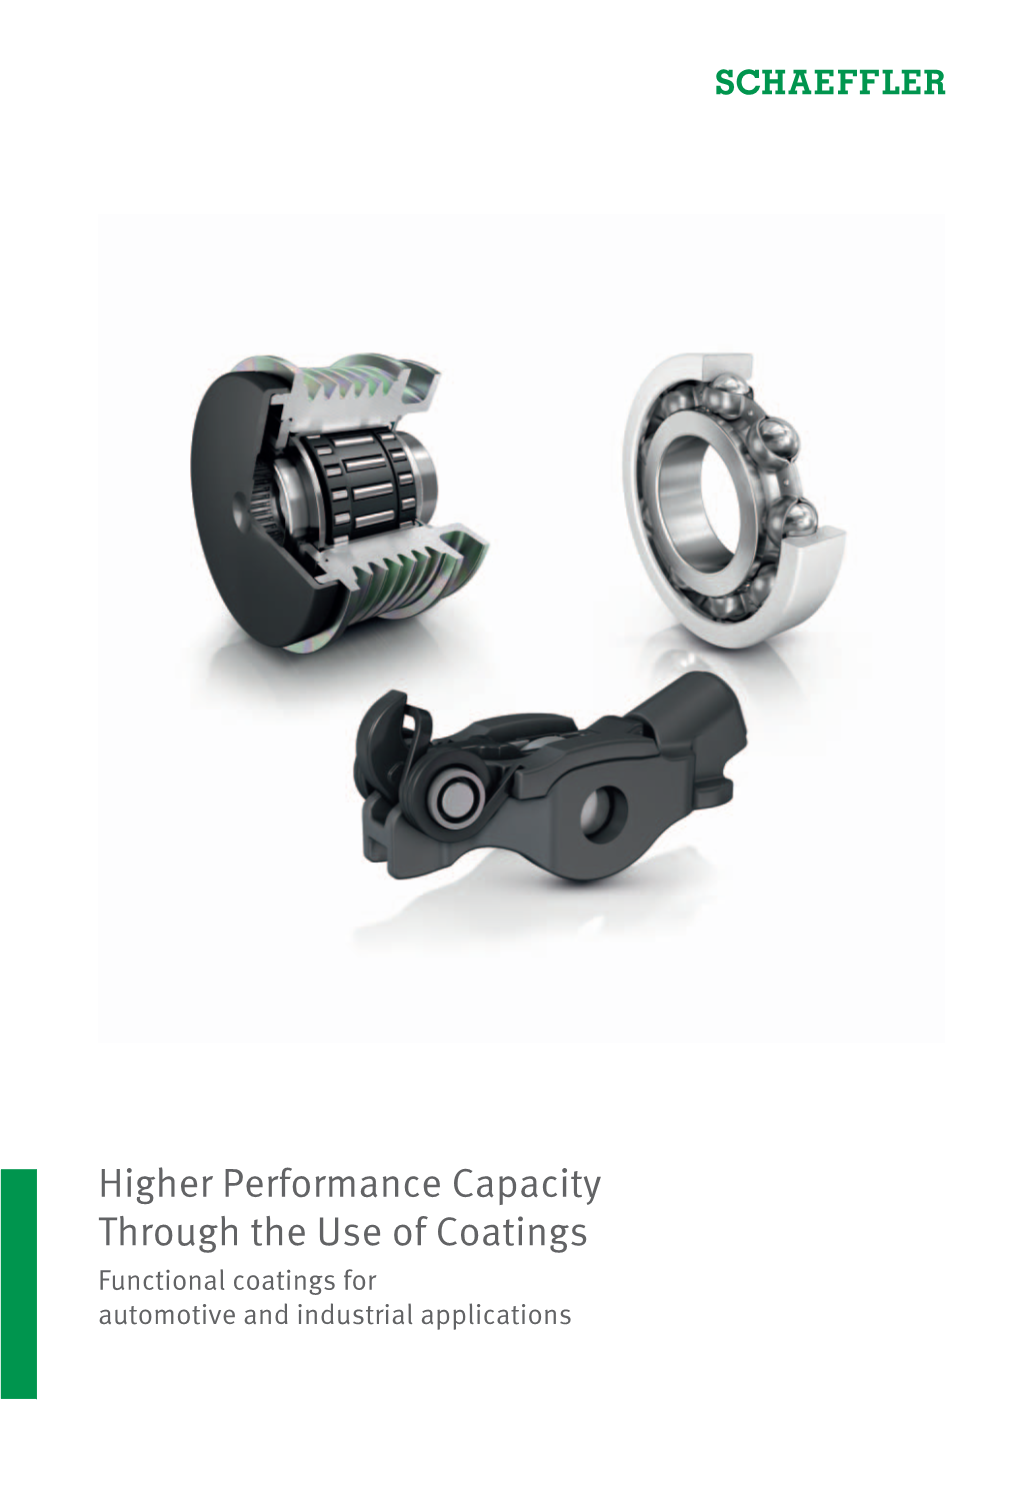 Higher Performance Capacity Through the Use of Coatings Functional Coatings for Automotive and Industrial Applications